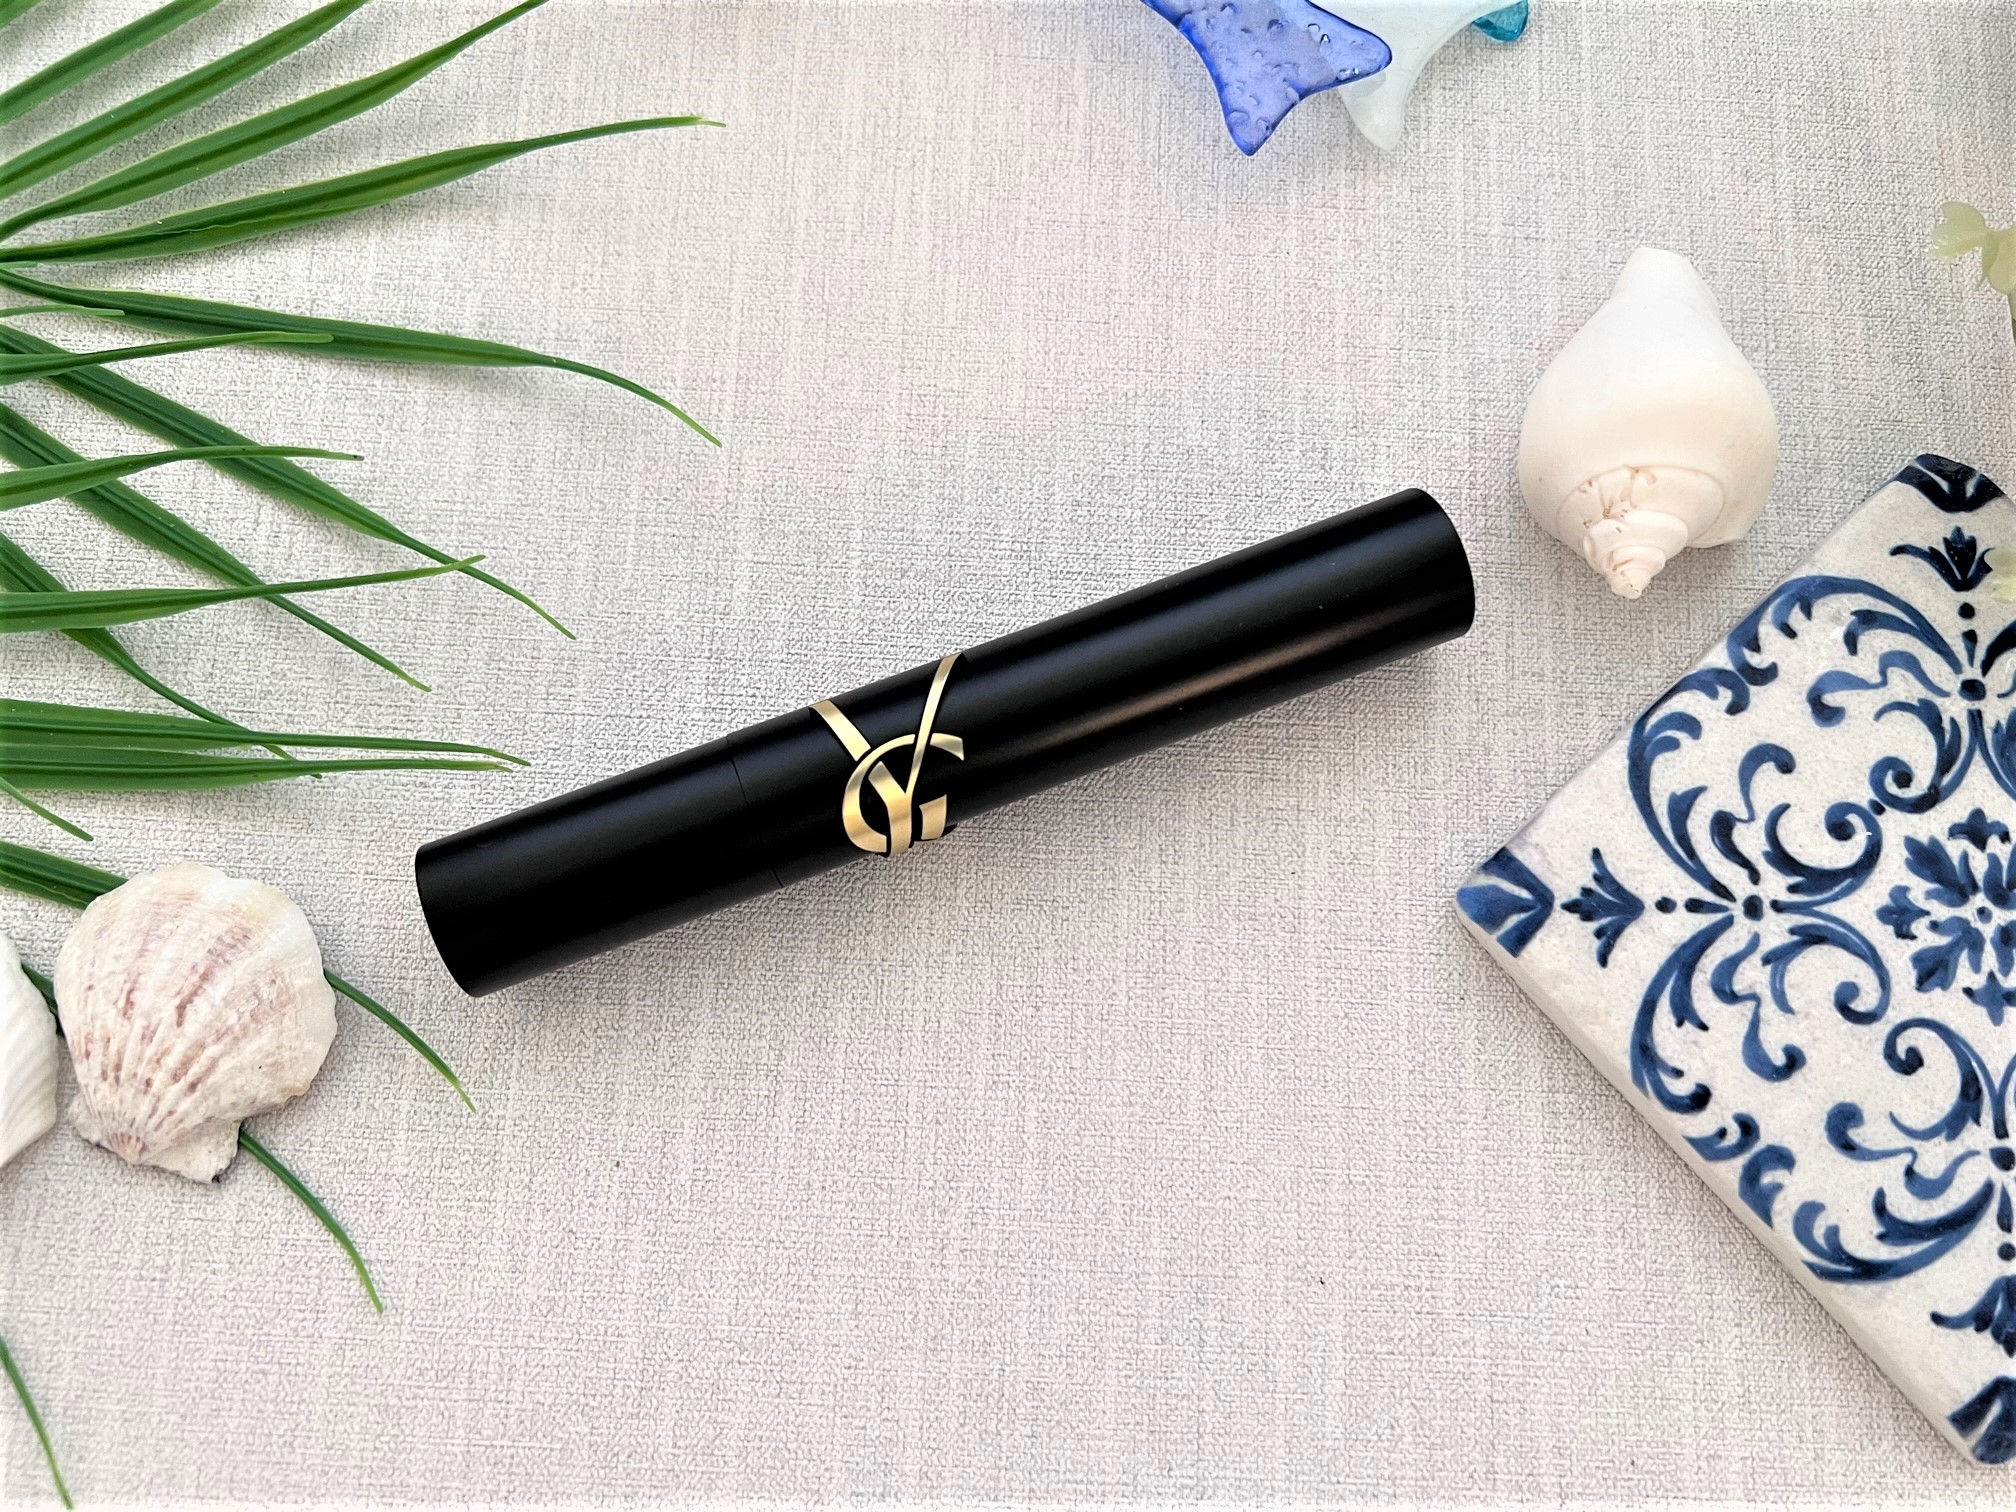 Love a more natural look? Try @yslbeauty New Lash Clash Extreme Volume, Mascara